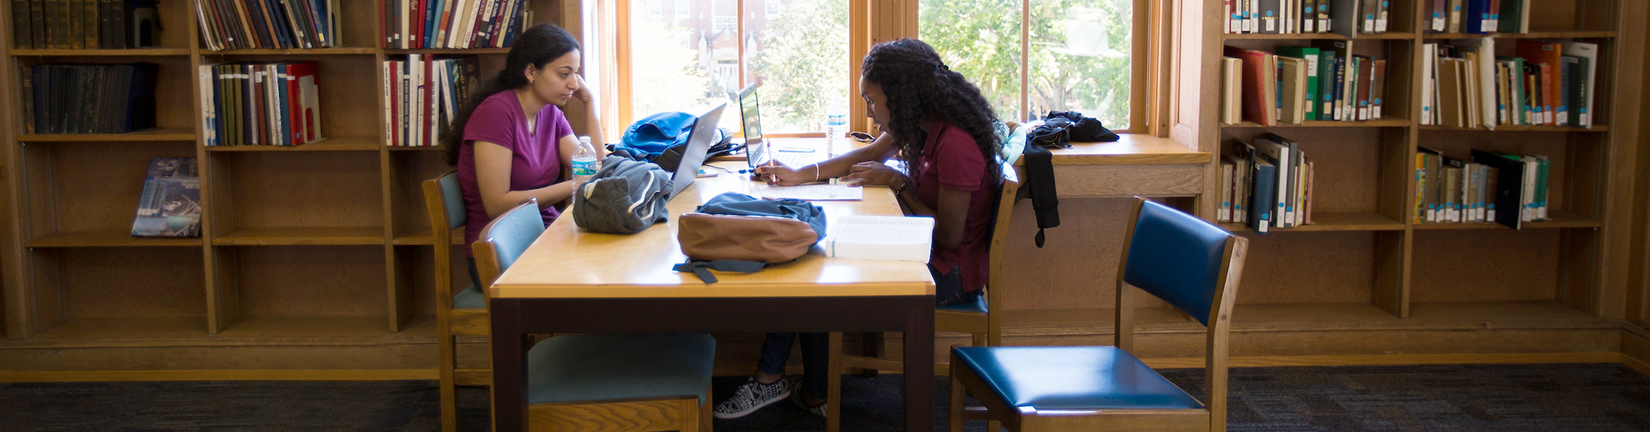 a photo of two female students studying